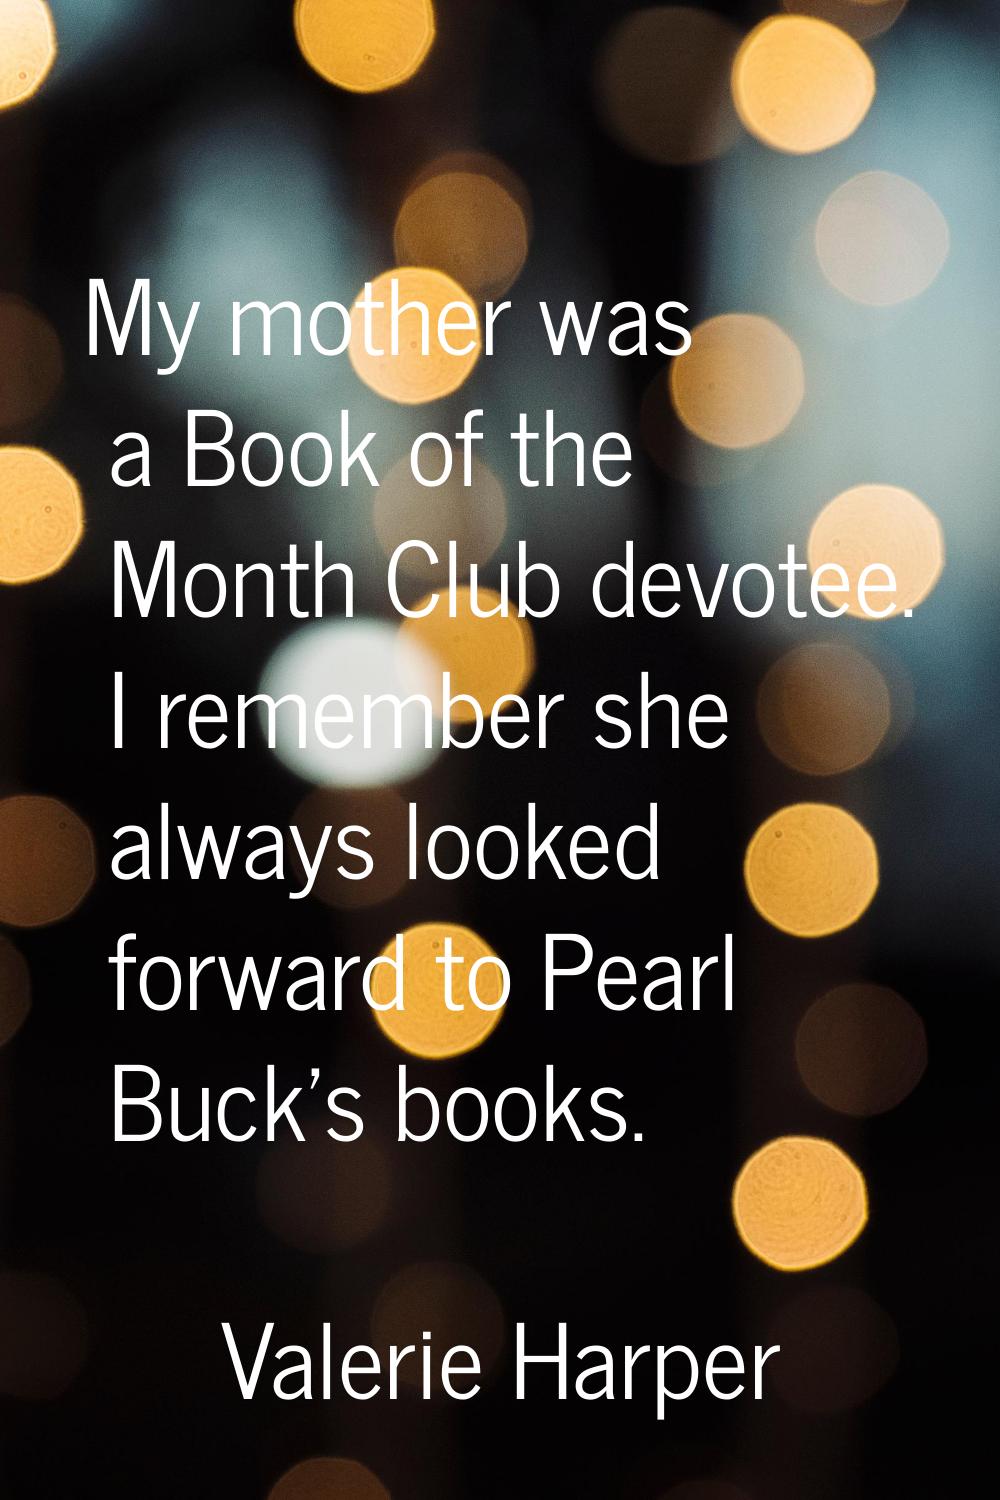 My mother was a Book of the Month Club devotee. I remember she always looked forward to Pearl Buck'